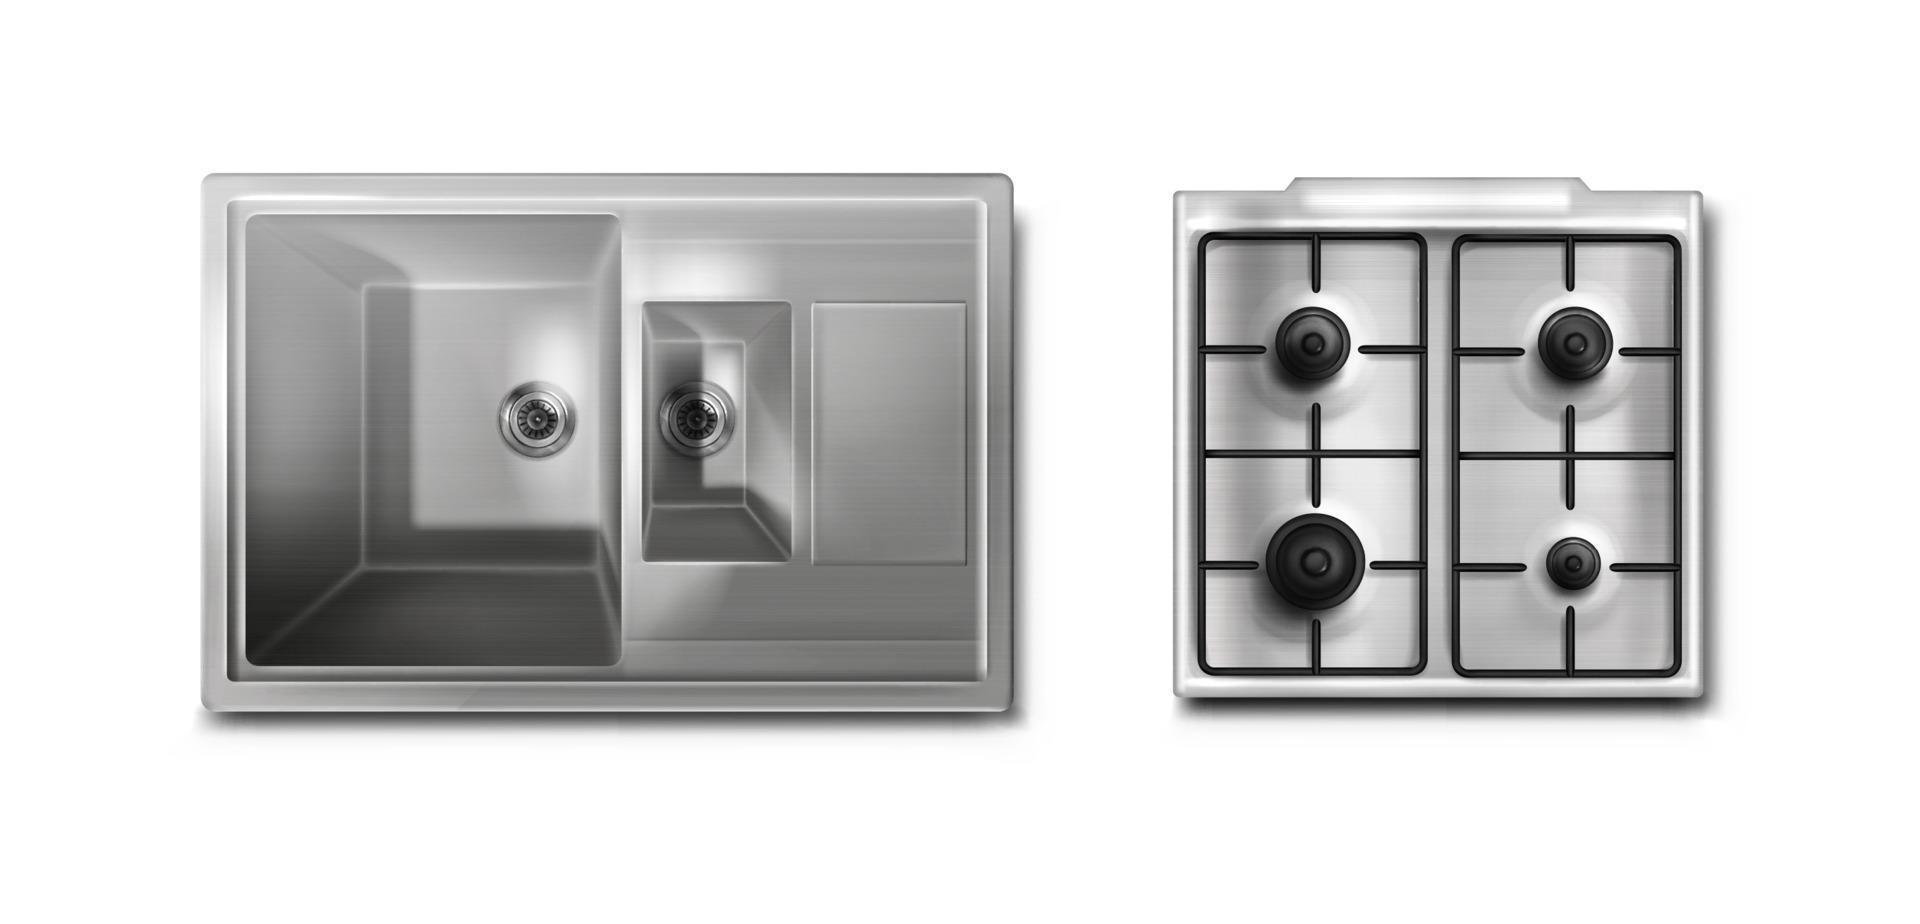 Stainless steel sink and gas stove mockup top view vector